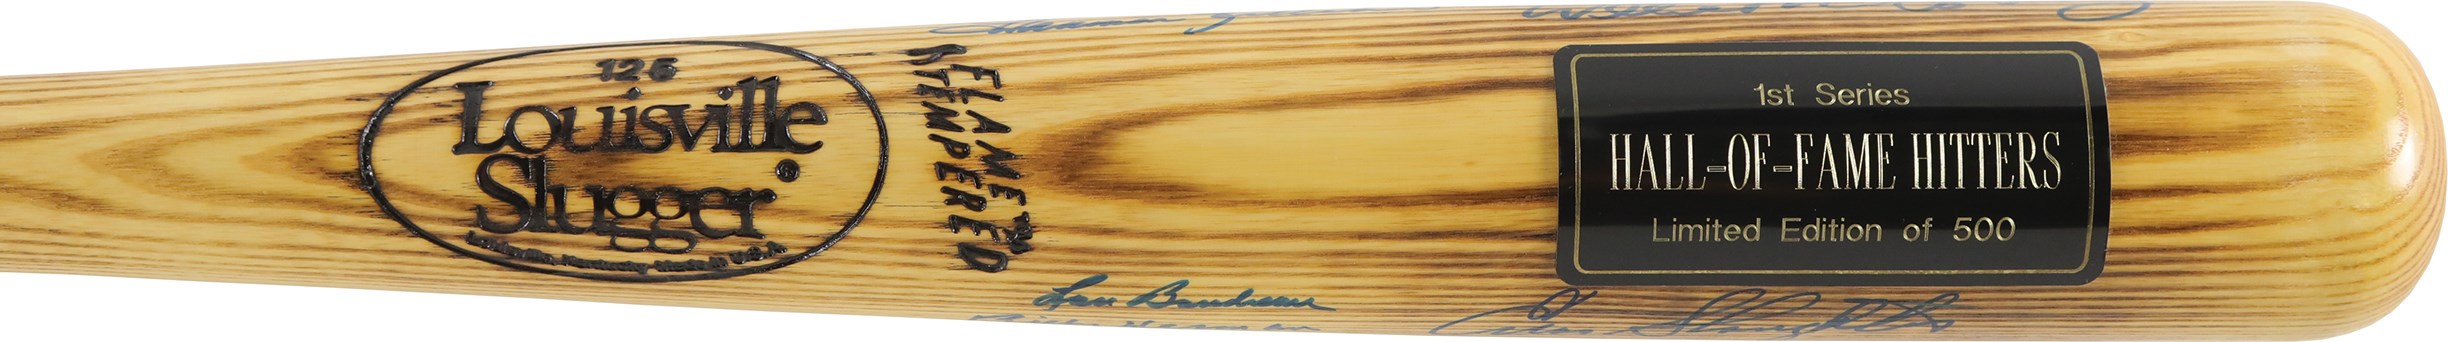 Hall of Fame Hitters Multi-Signed Bat w/Mays